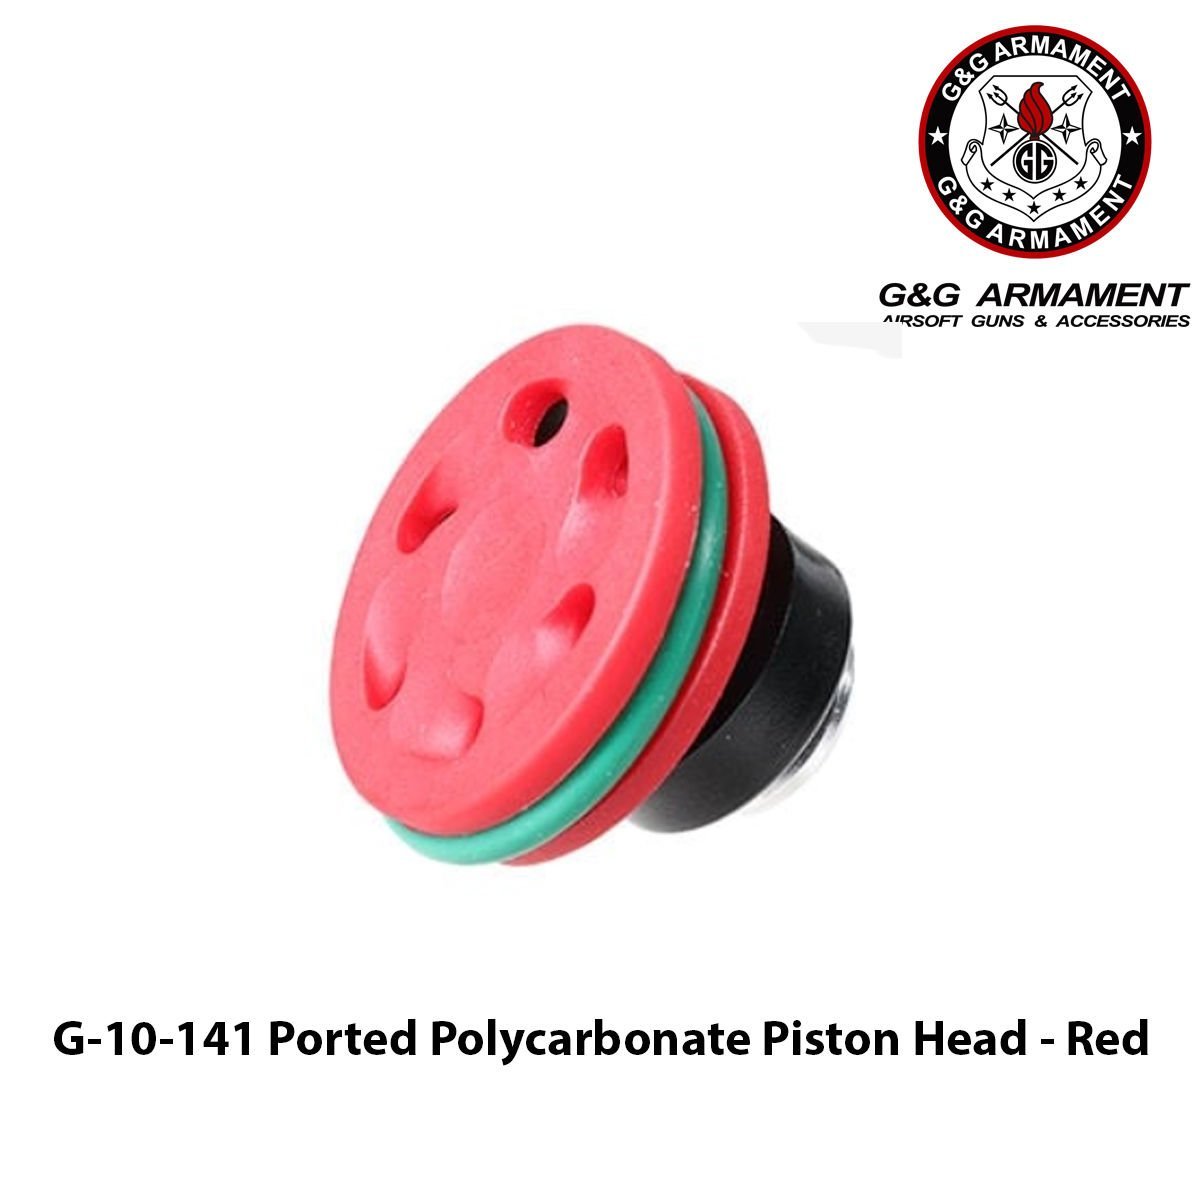 G-10-141 Ported Polycarbonate Piston Head - Red